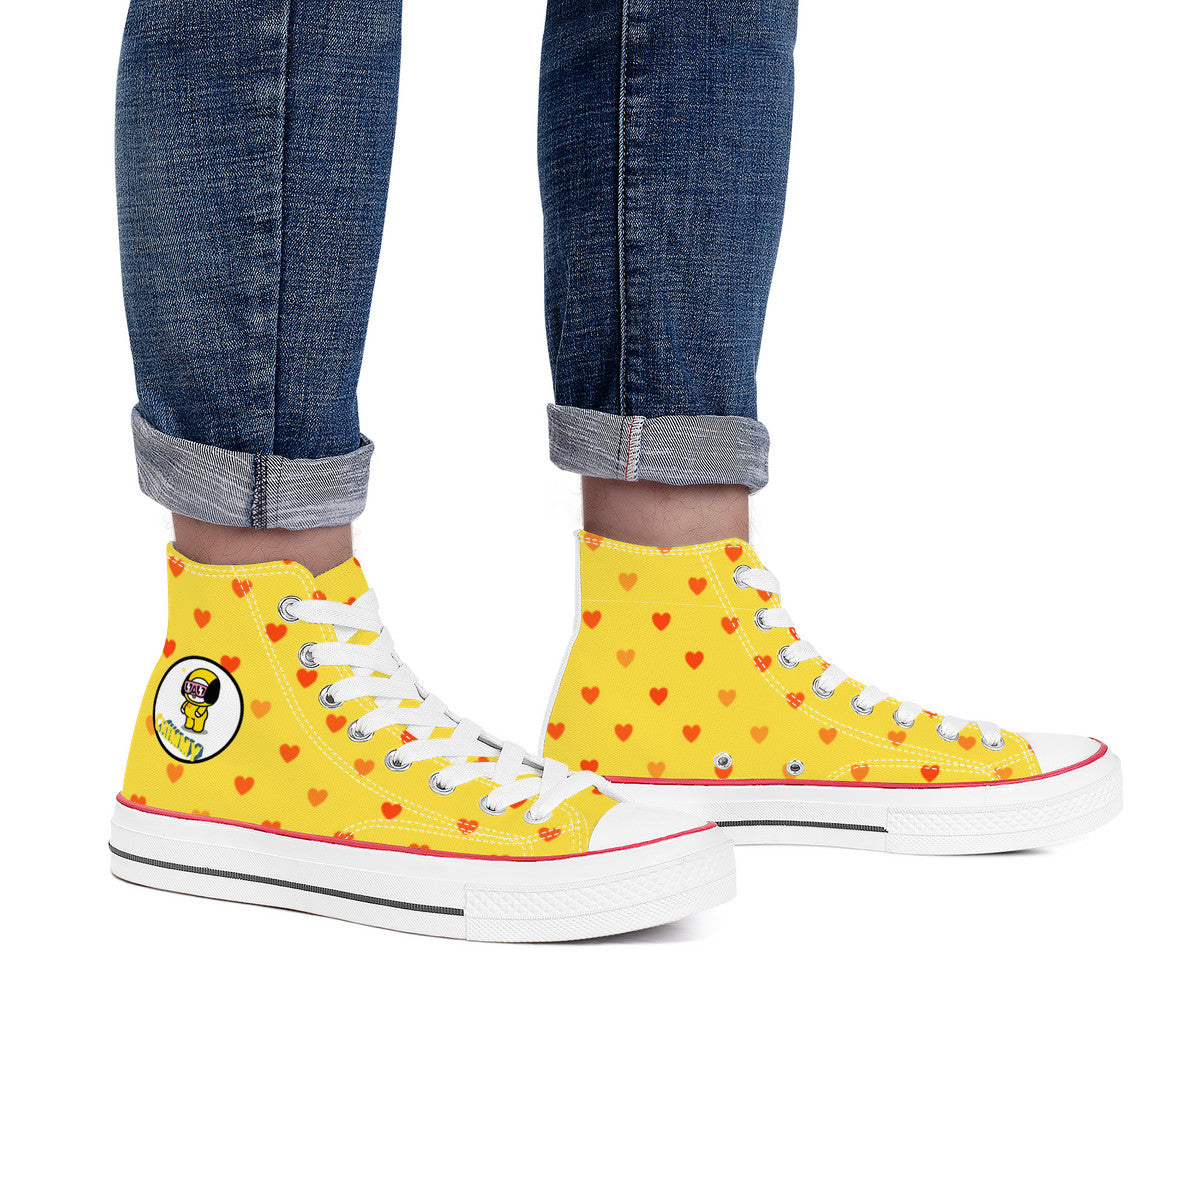 BT21 Chimmy High Top Canvas Sneakers